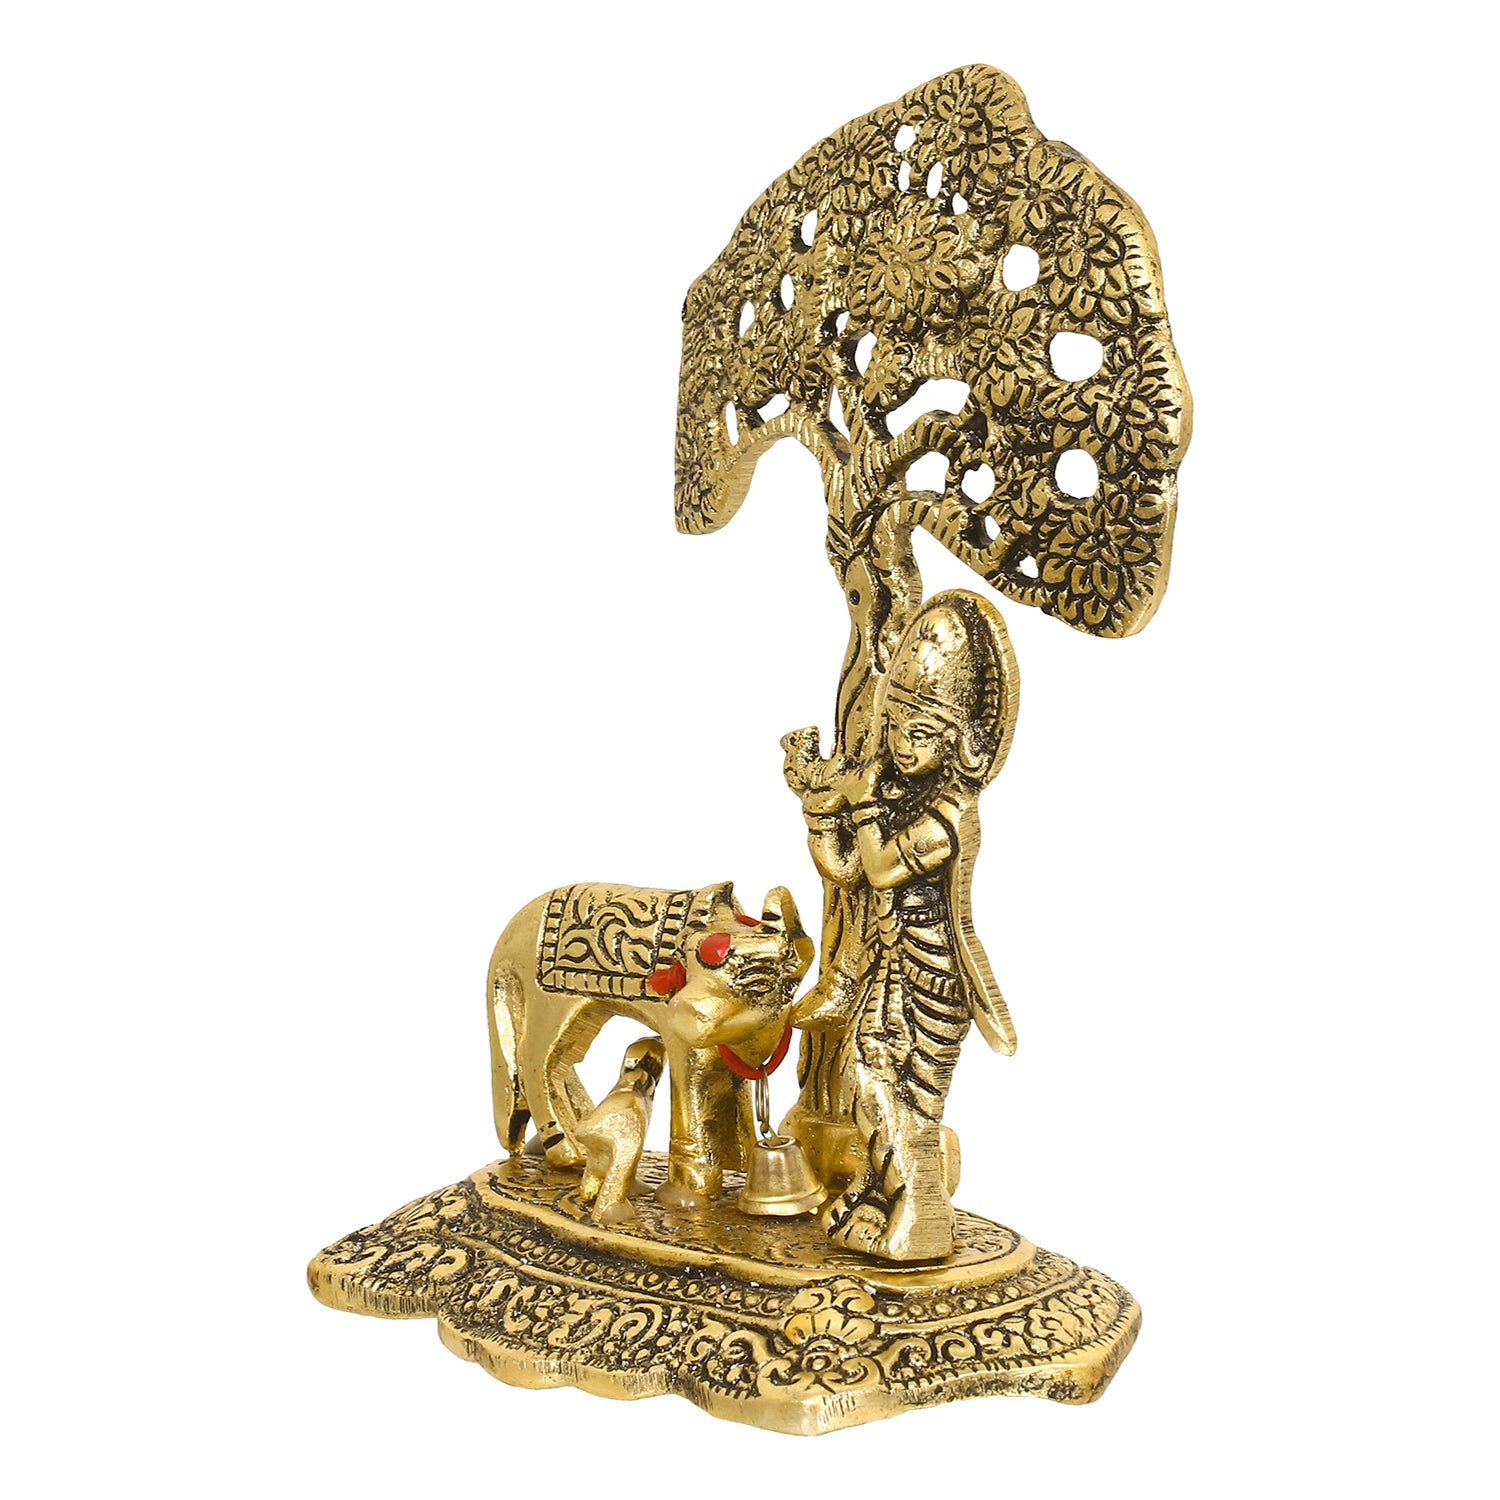 Golden Lord Krishna Idol playing Flute under Tree with Cow and Calf 5